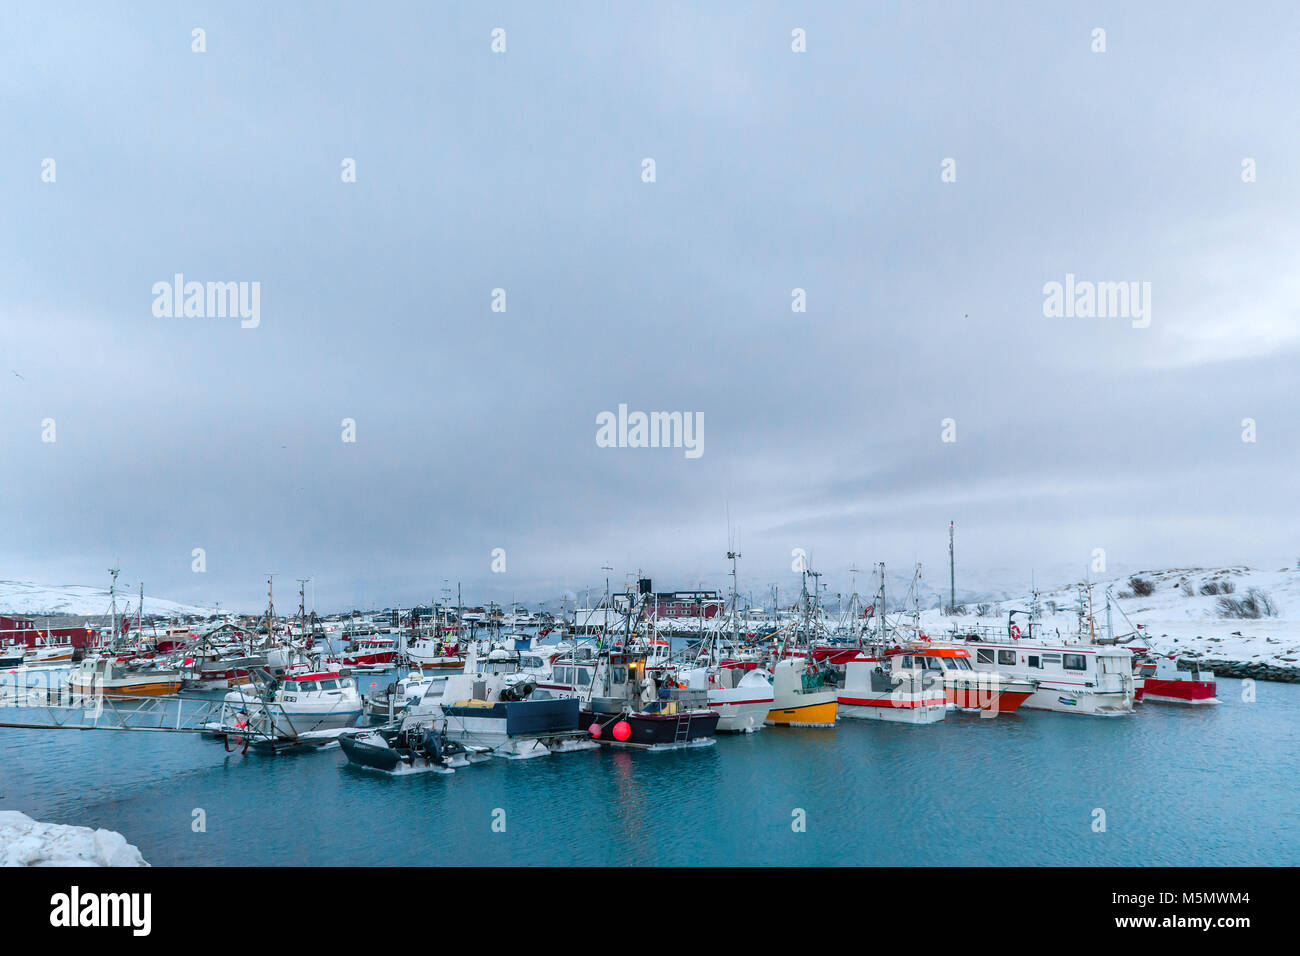 From the small fishing village of Batsfjord, Finnmark county, north Norway. Most of the fishing fleet is in port due to bad weather forecast. Stock Photo